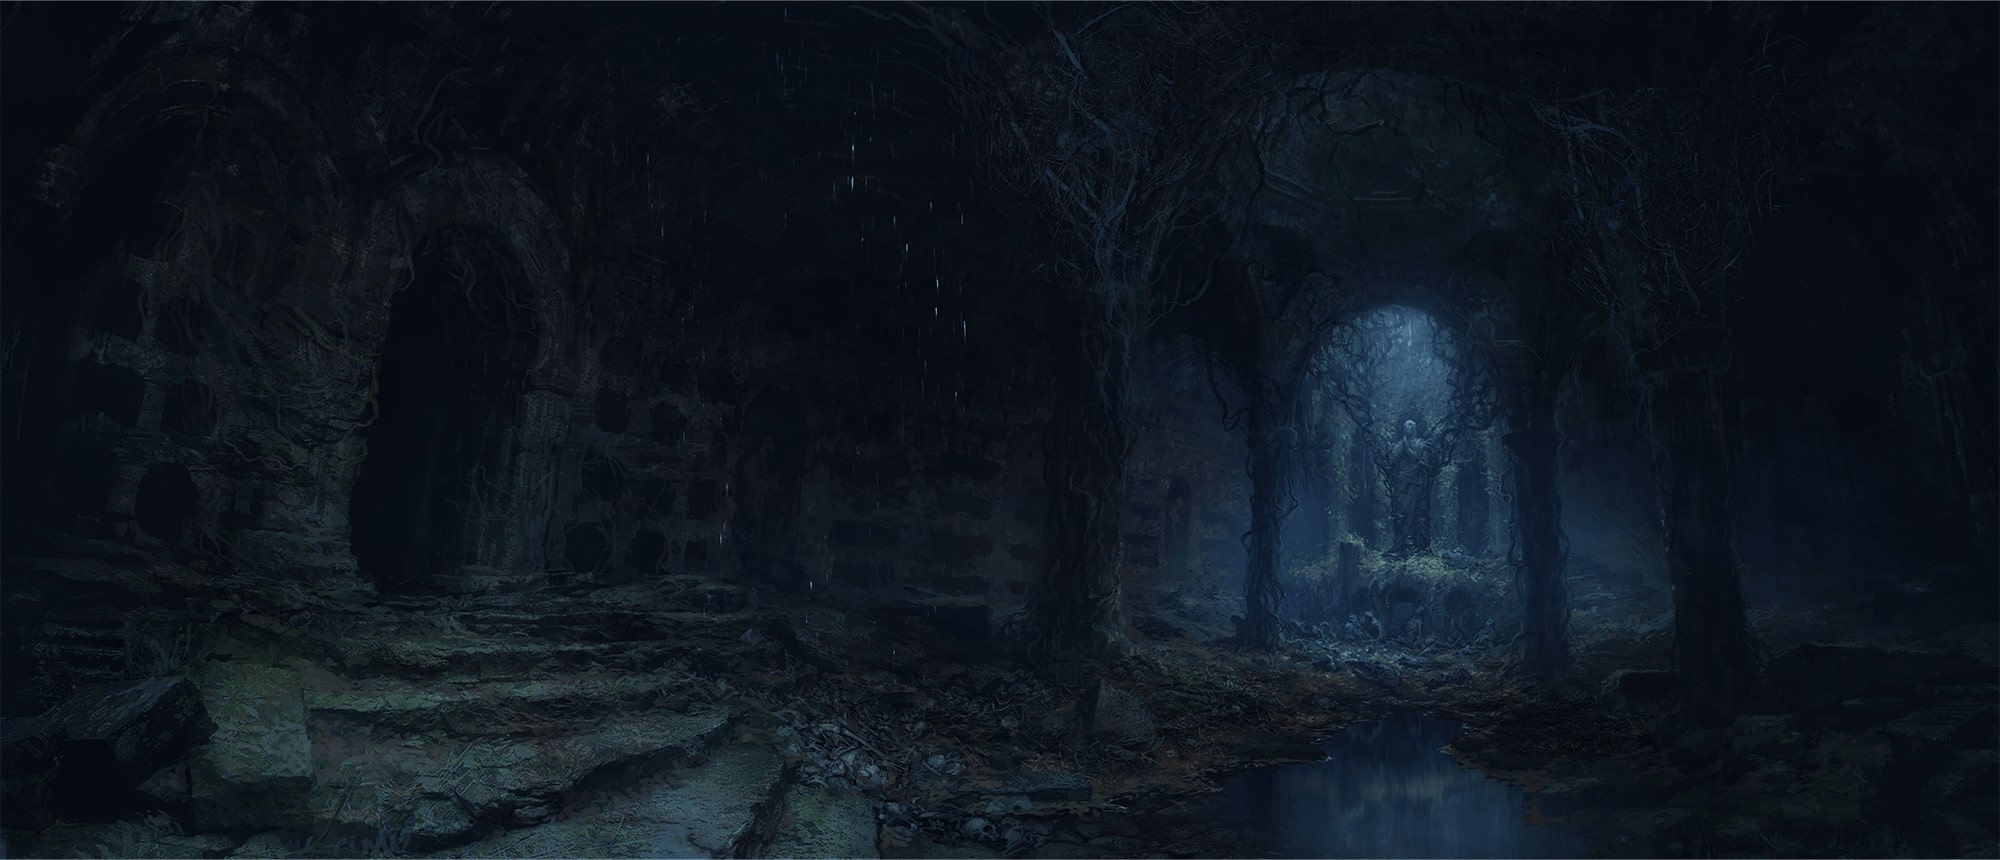 Explore the Accursed groves and discover the horrors within in the world of The Lords of the Fallen